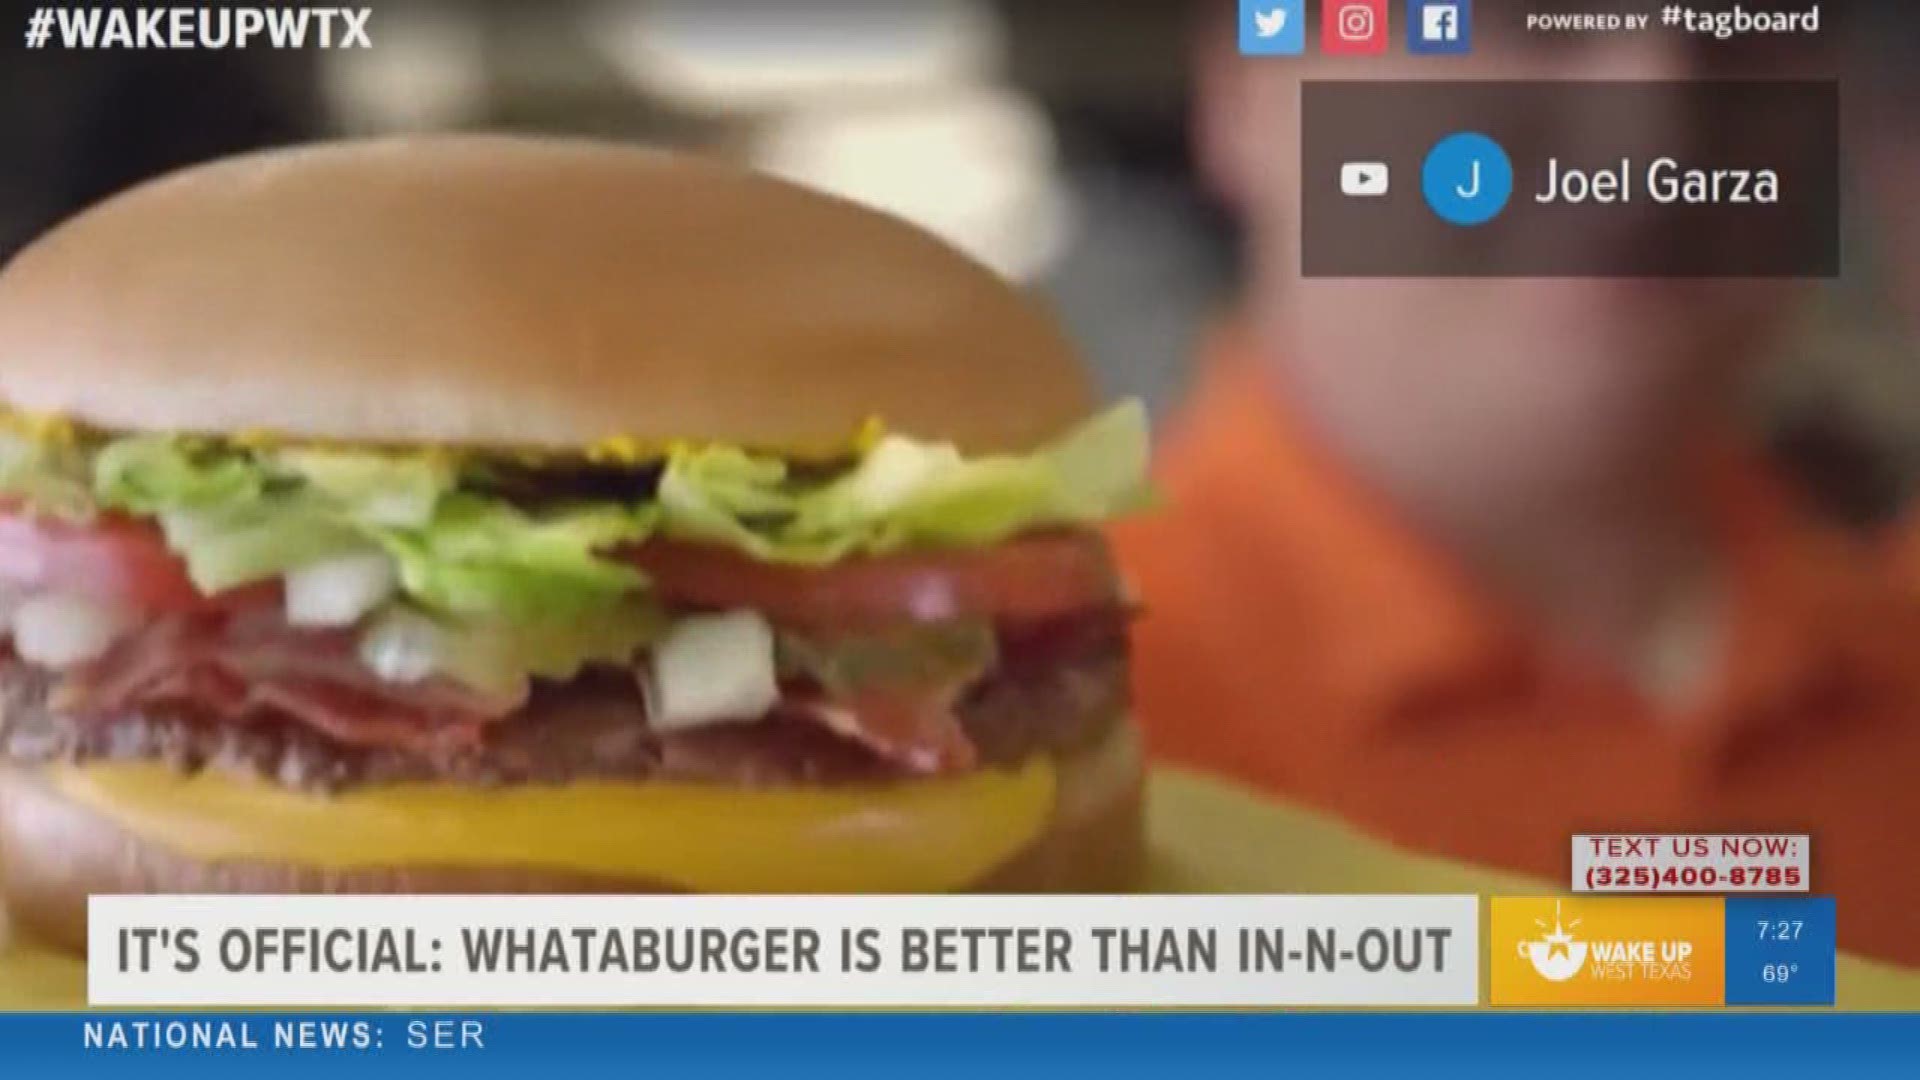 Our Malik Mingo shared what people said on social media about a USA Today article that ranks Whataburger as a better burger chain than In-N-Out.